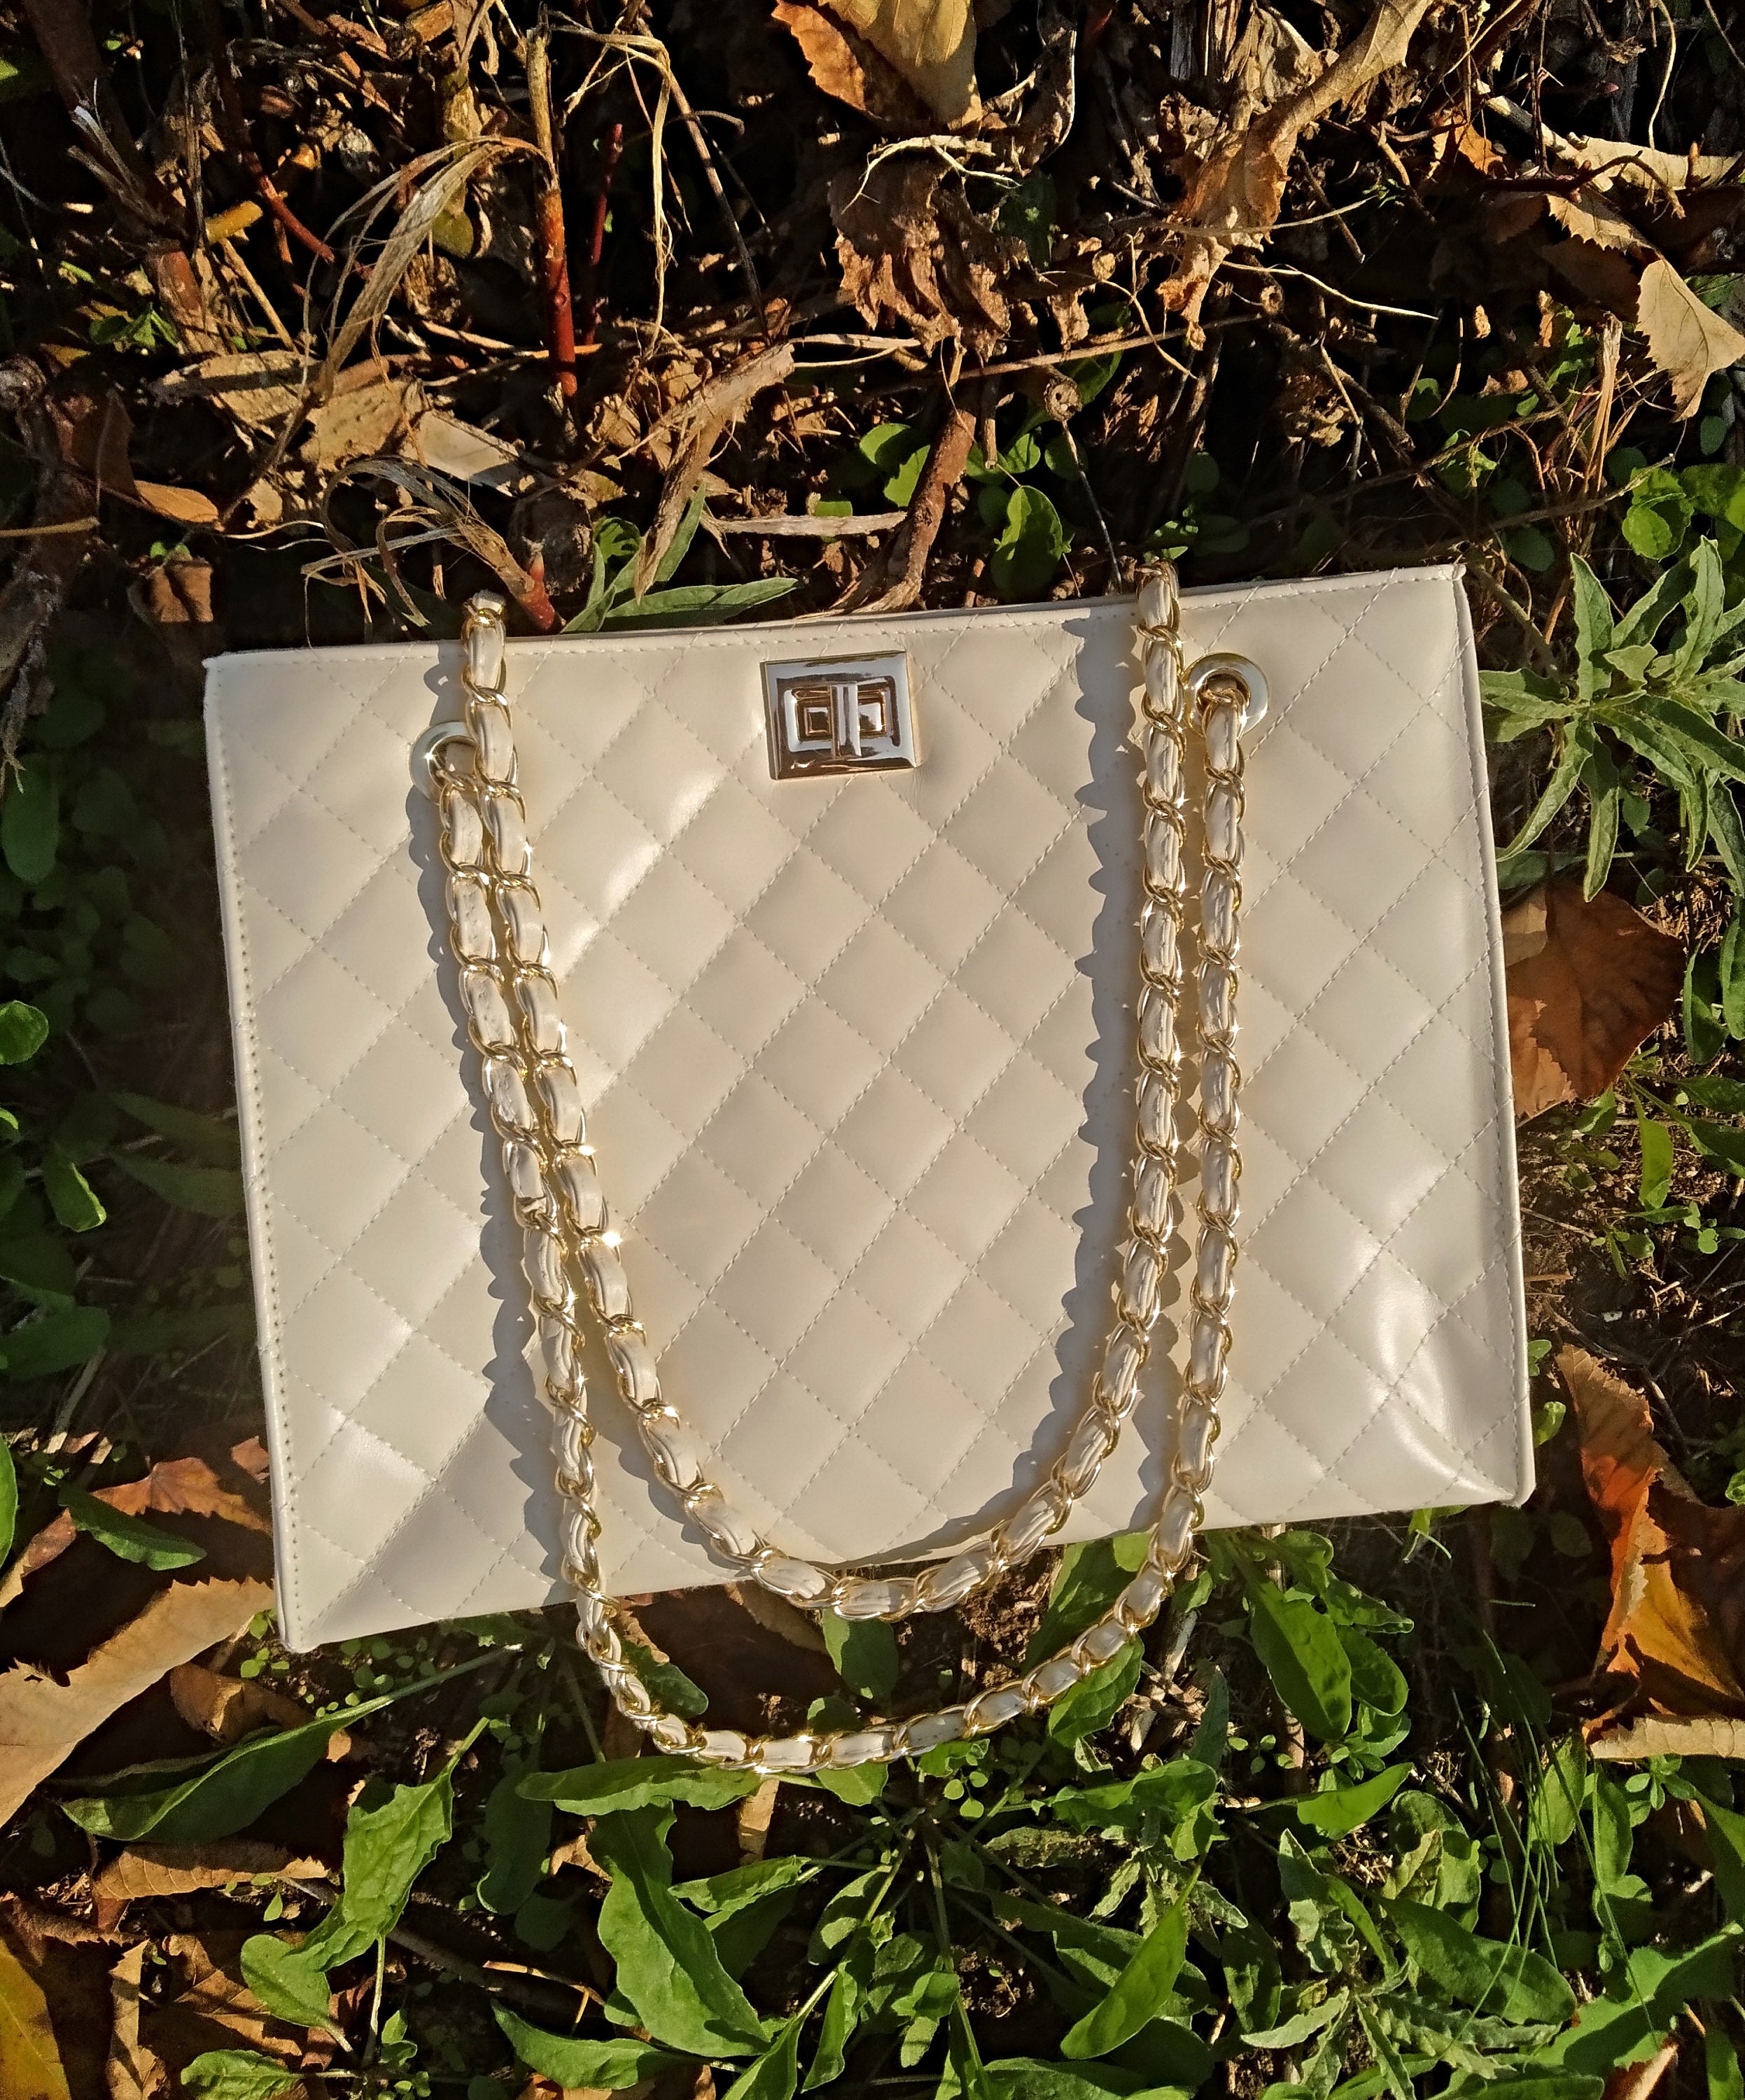 chanel large deauville bag